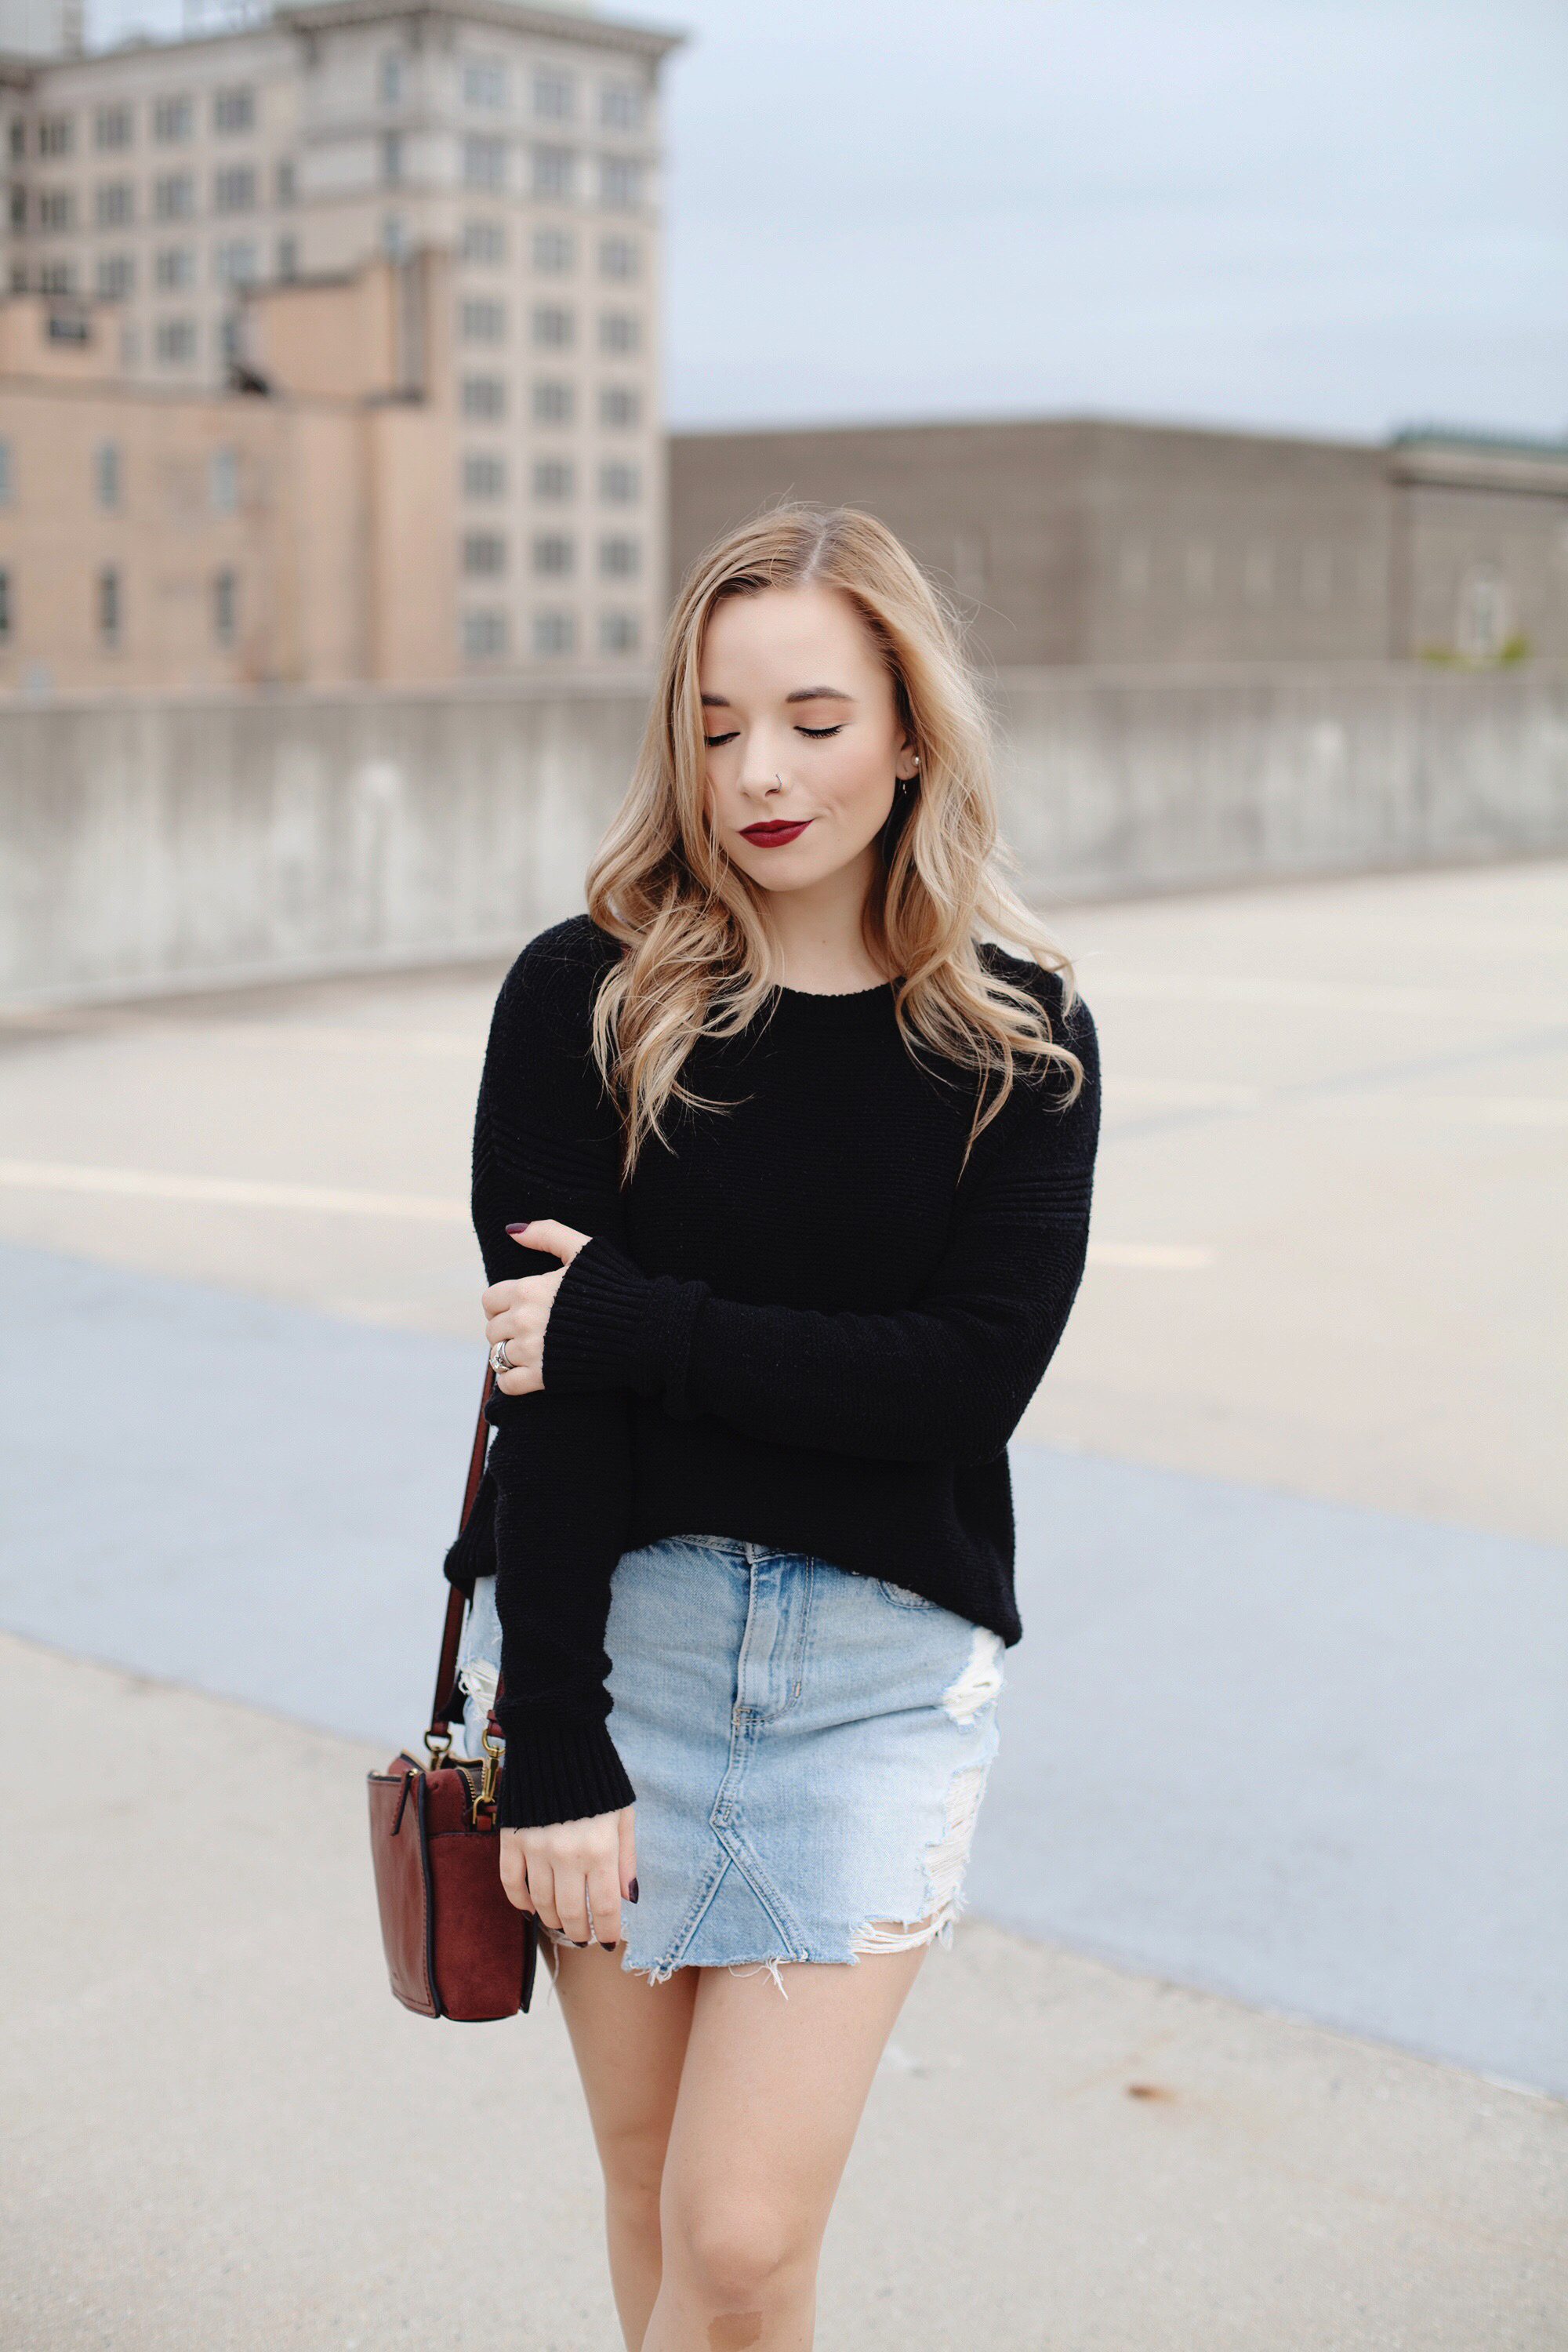 How To Wear A Denim Mini Skirt For Fall